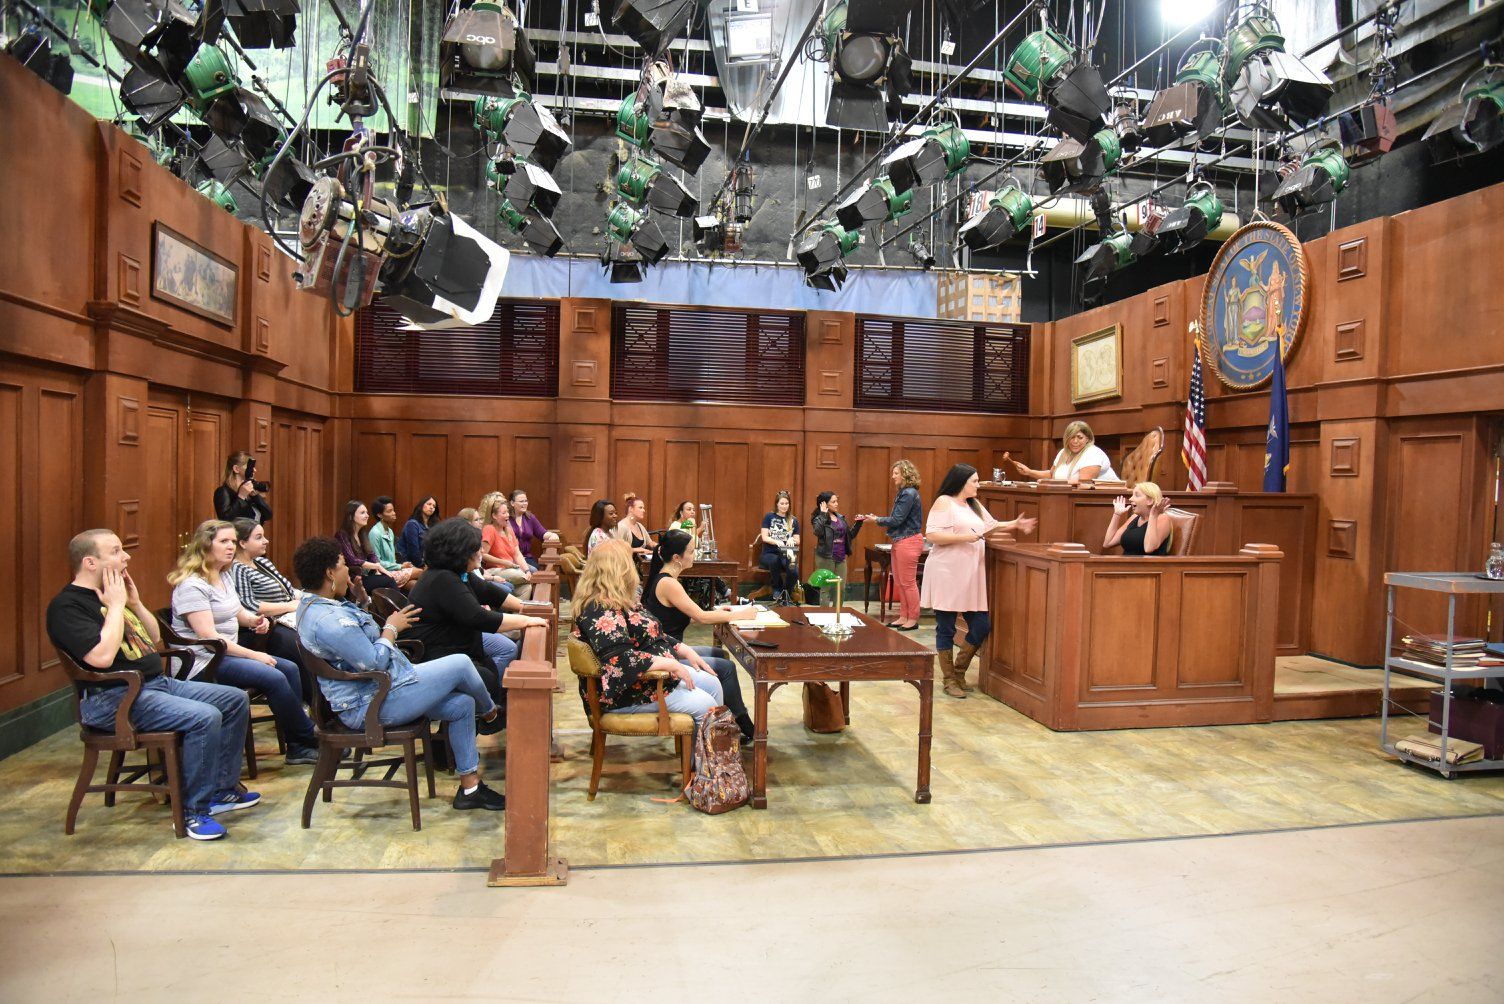 A look at General Hospital's court set 